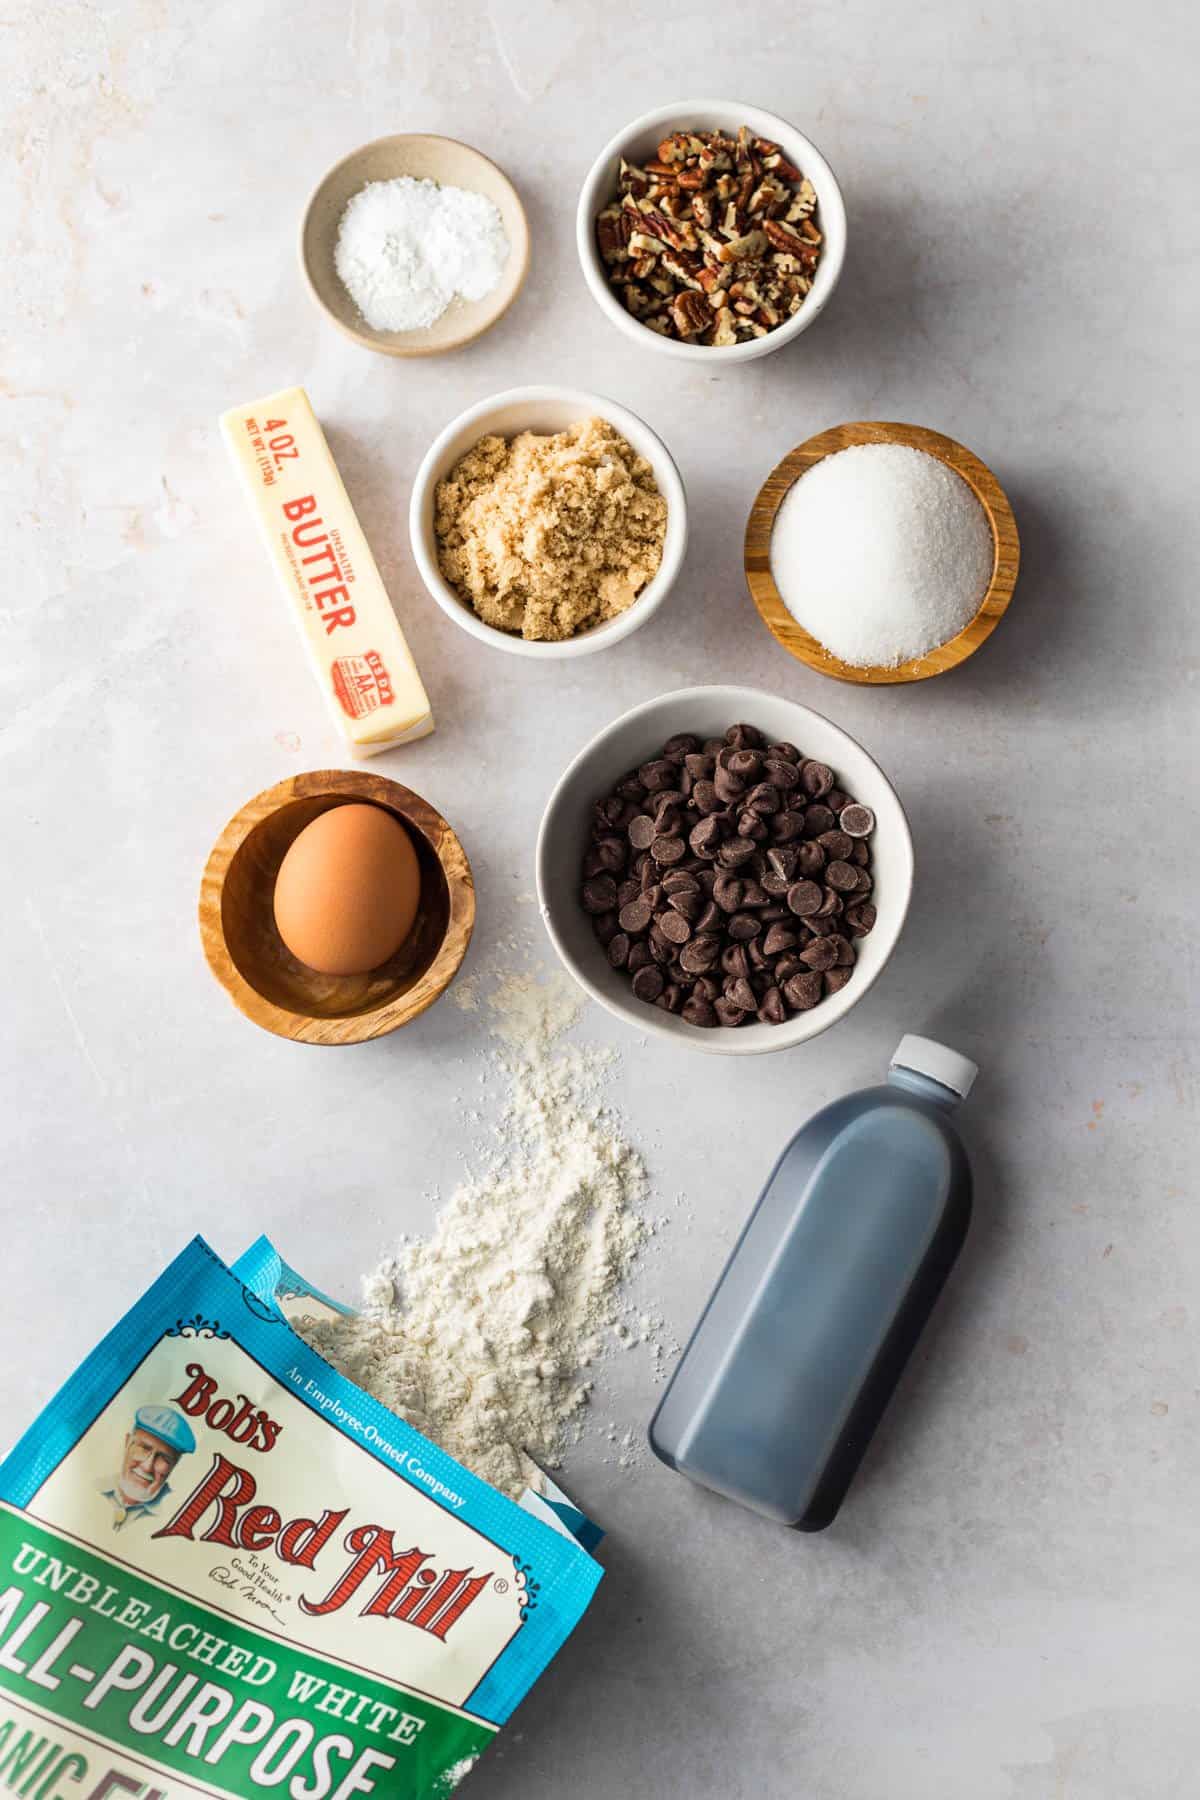 chocolate chip pecan cookie ingredients - flour, vanilla extract, egg, brown and white sugar, butter, chocolate chips and pecans.